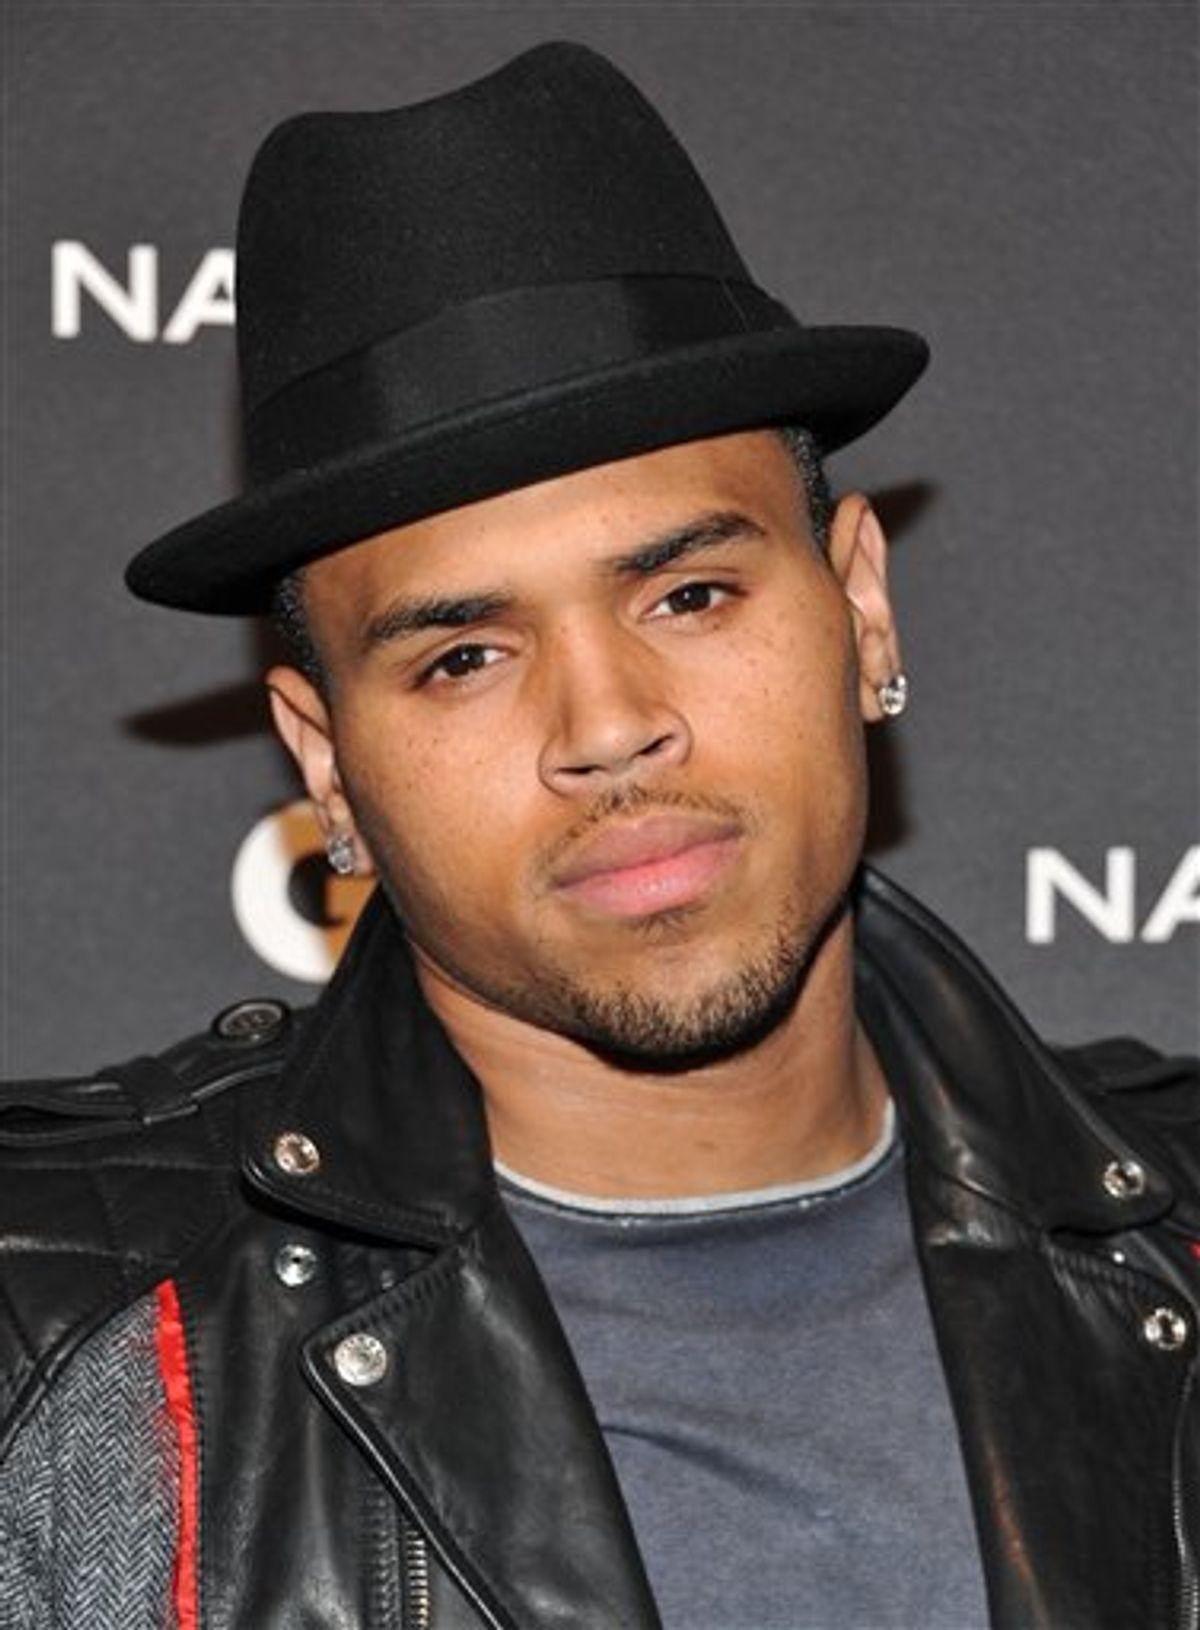 FILE - In this Oct. 27, 2010 file photo, singer Chris Brown attends 'The Gentleman's Ball' hosted by GQ Magazine at the Edison Ballroom in New York. (AP Photo/Evan Agostini, file) (AP)